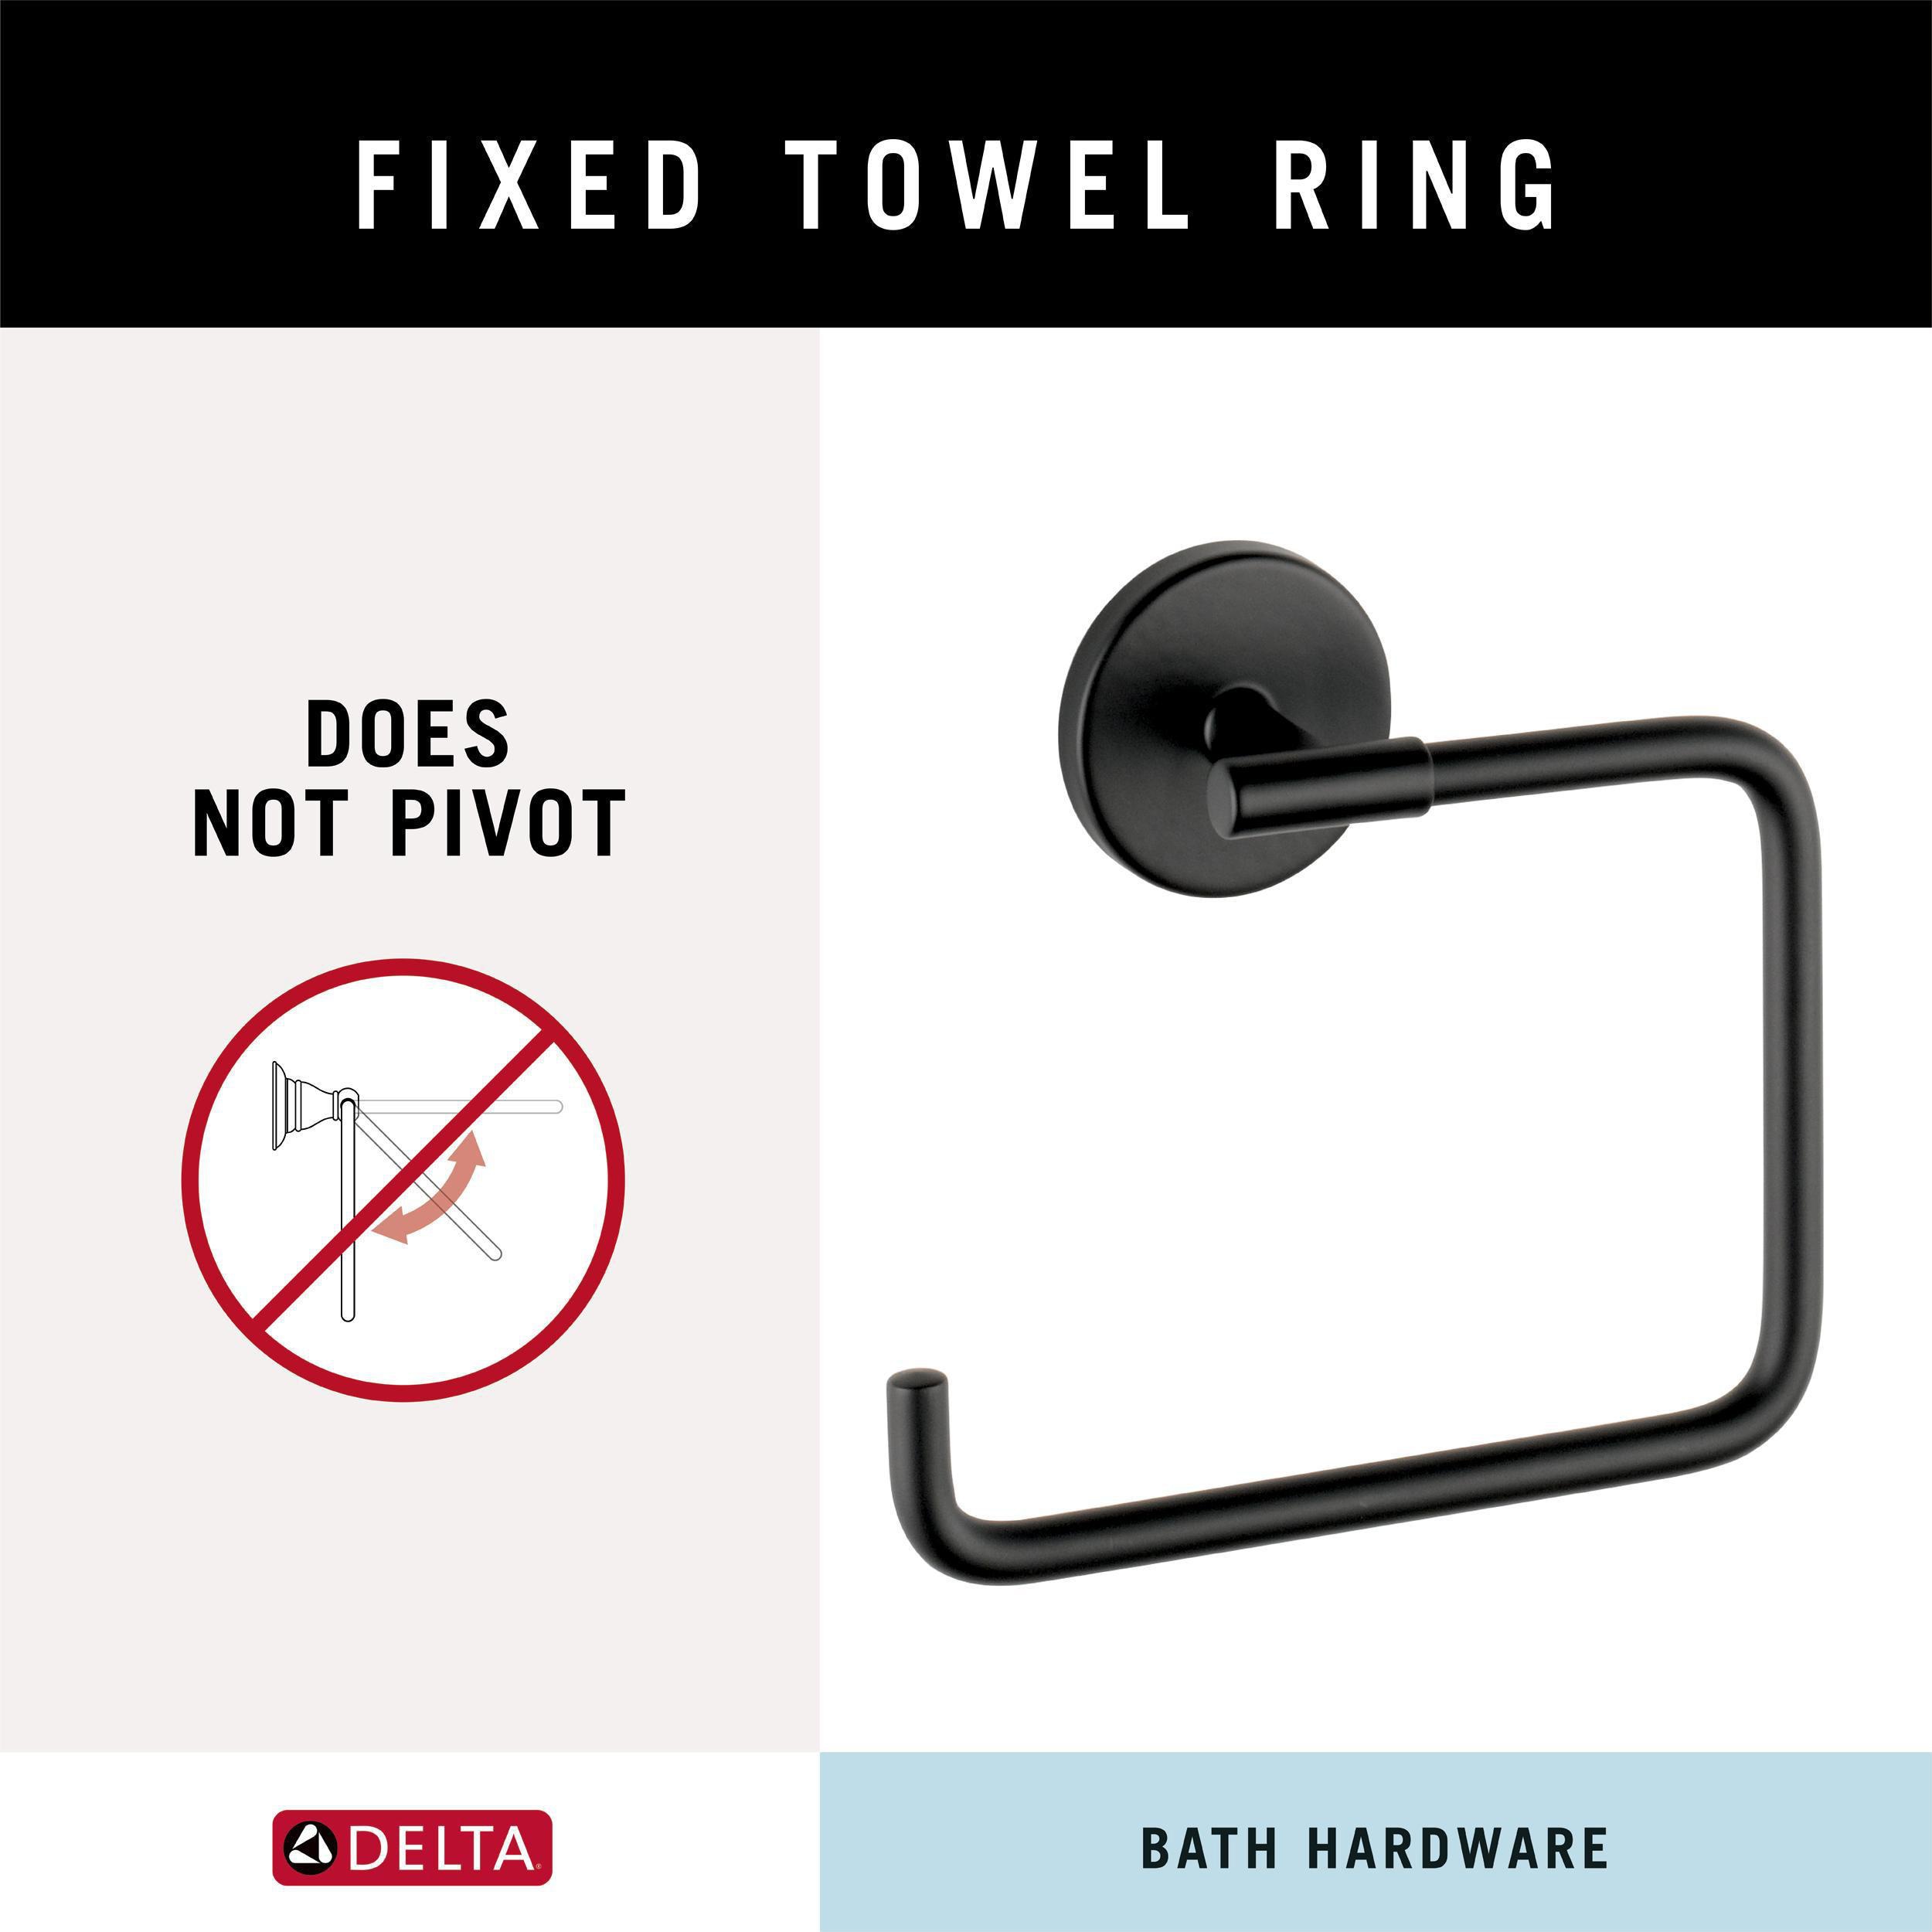 Delta 4-Piece Trinsic Matte Black Decorative Bathroom Hardware Set with  Towel Bar, Toilet Paper Holder, Towel Ring and Robe Hook in the Decorative  Bathroom Hardware Sets department at